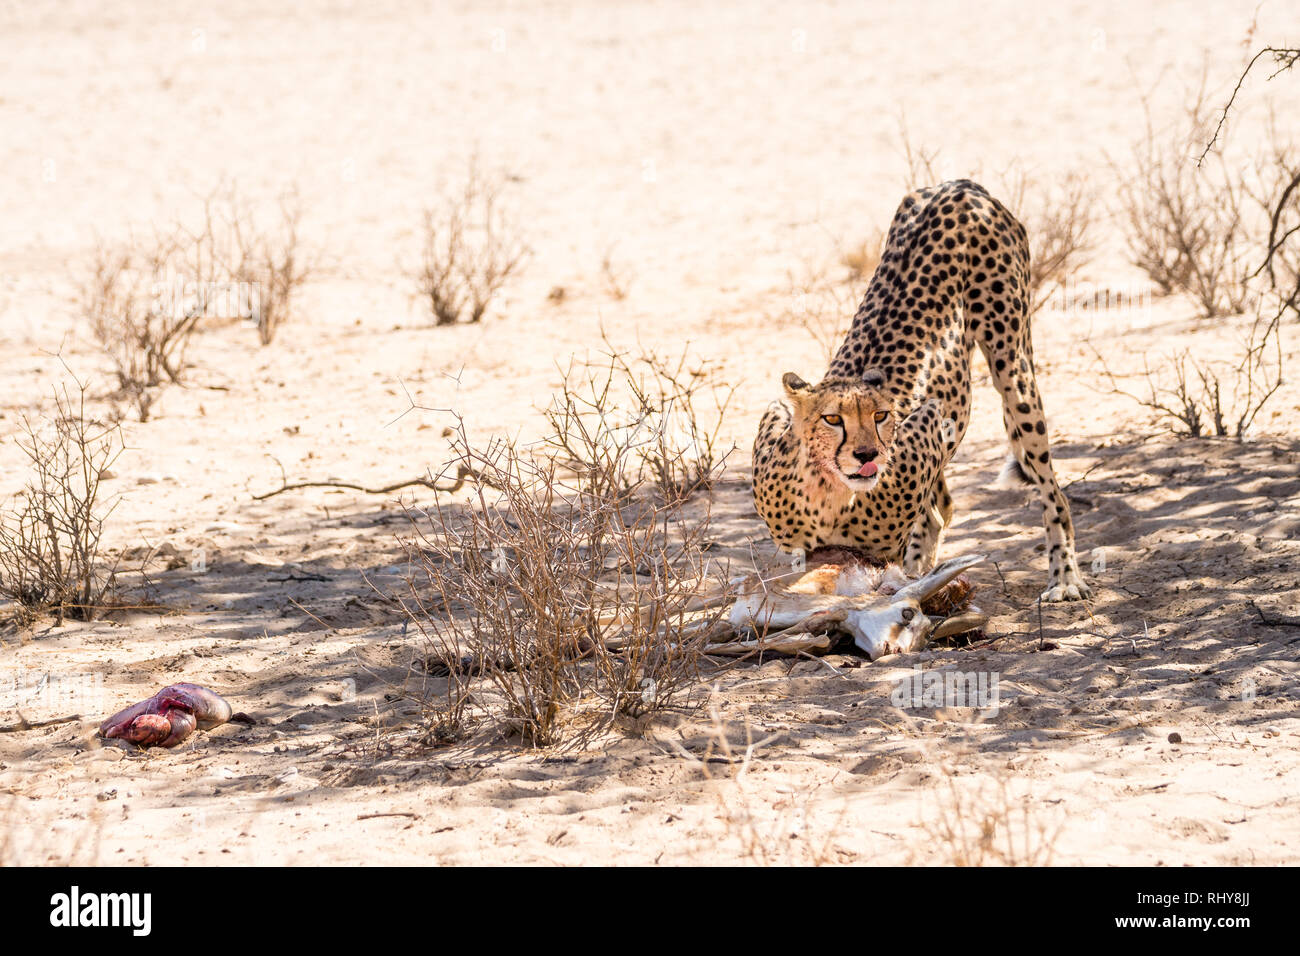 when we found this cheetah he ha just killed this baby springbock and started to feed. Stock Photo